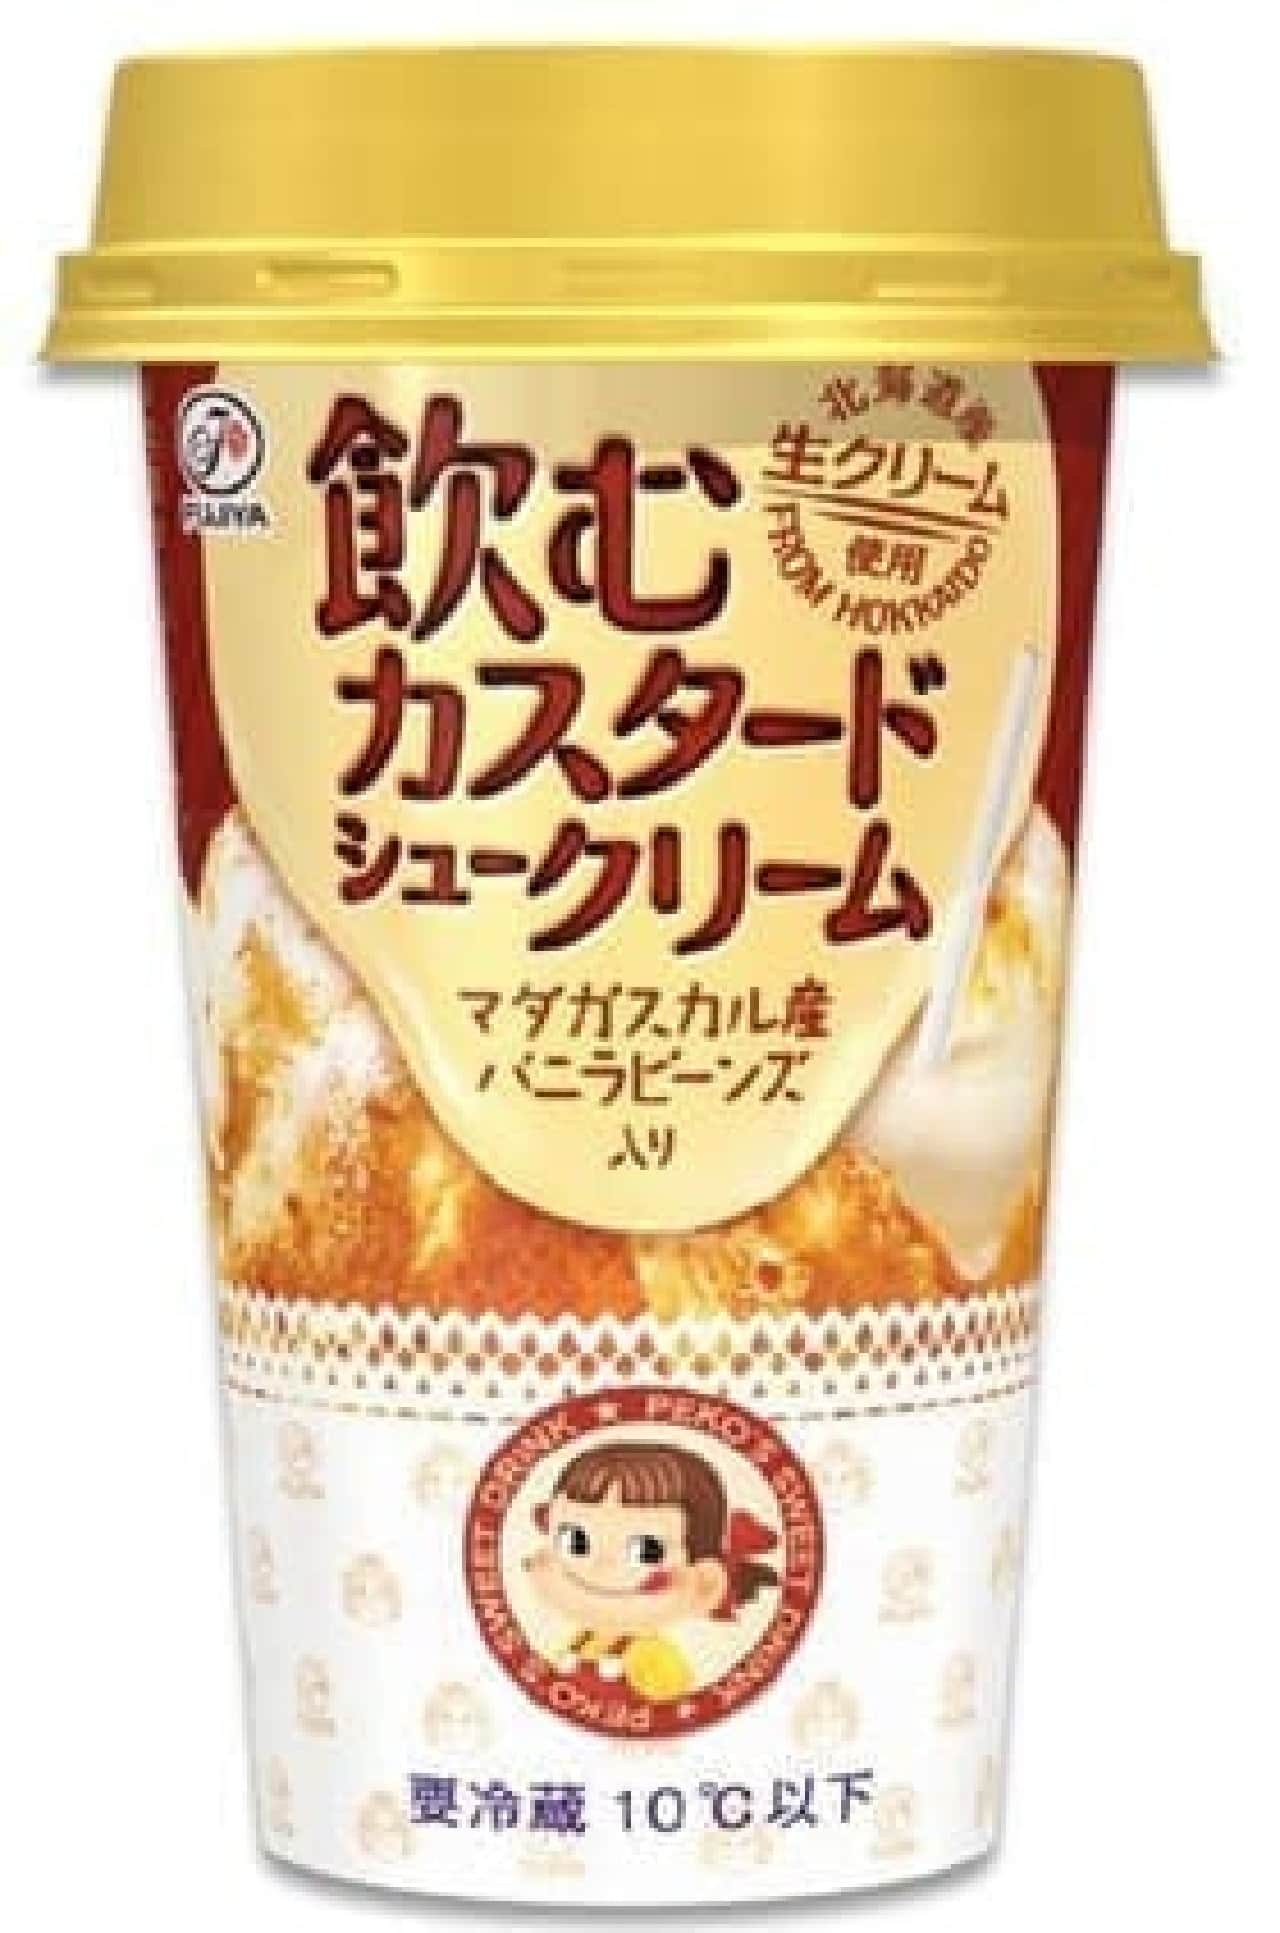 "Drinking cream puff" has become a drink!